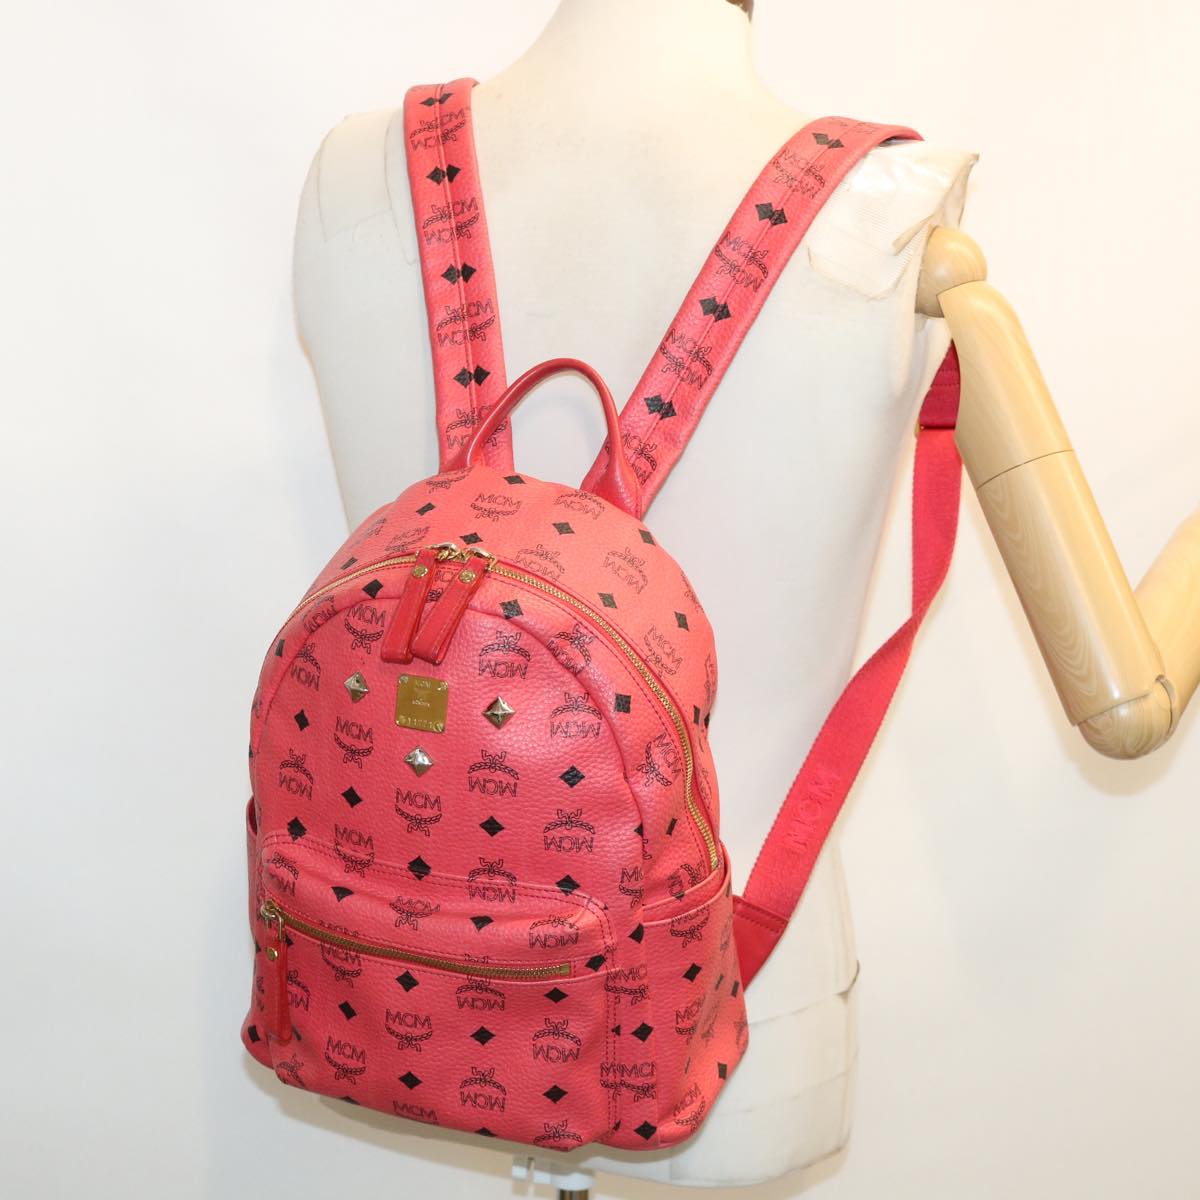 MCM Vicetos Backpack PVC Leather Pink Auth tb290